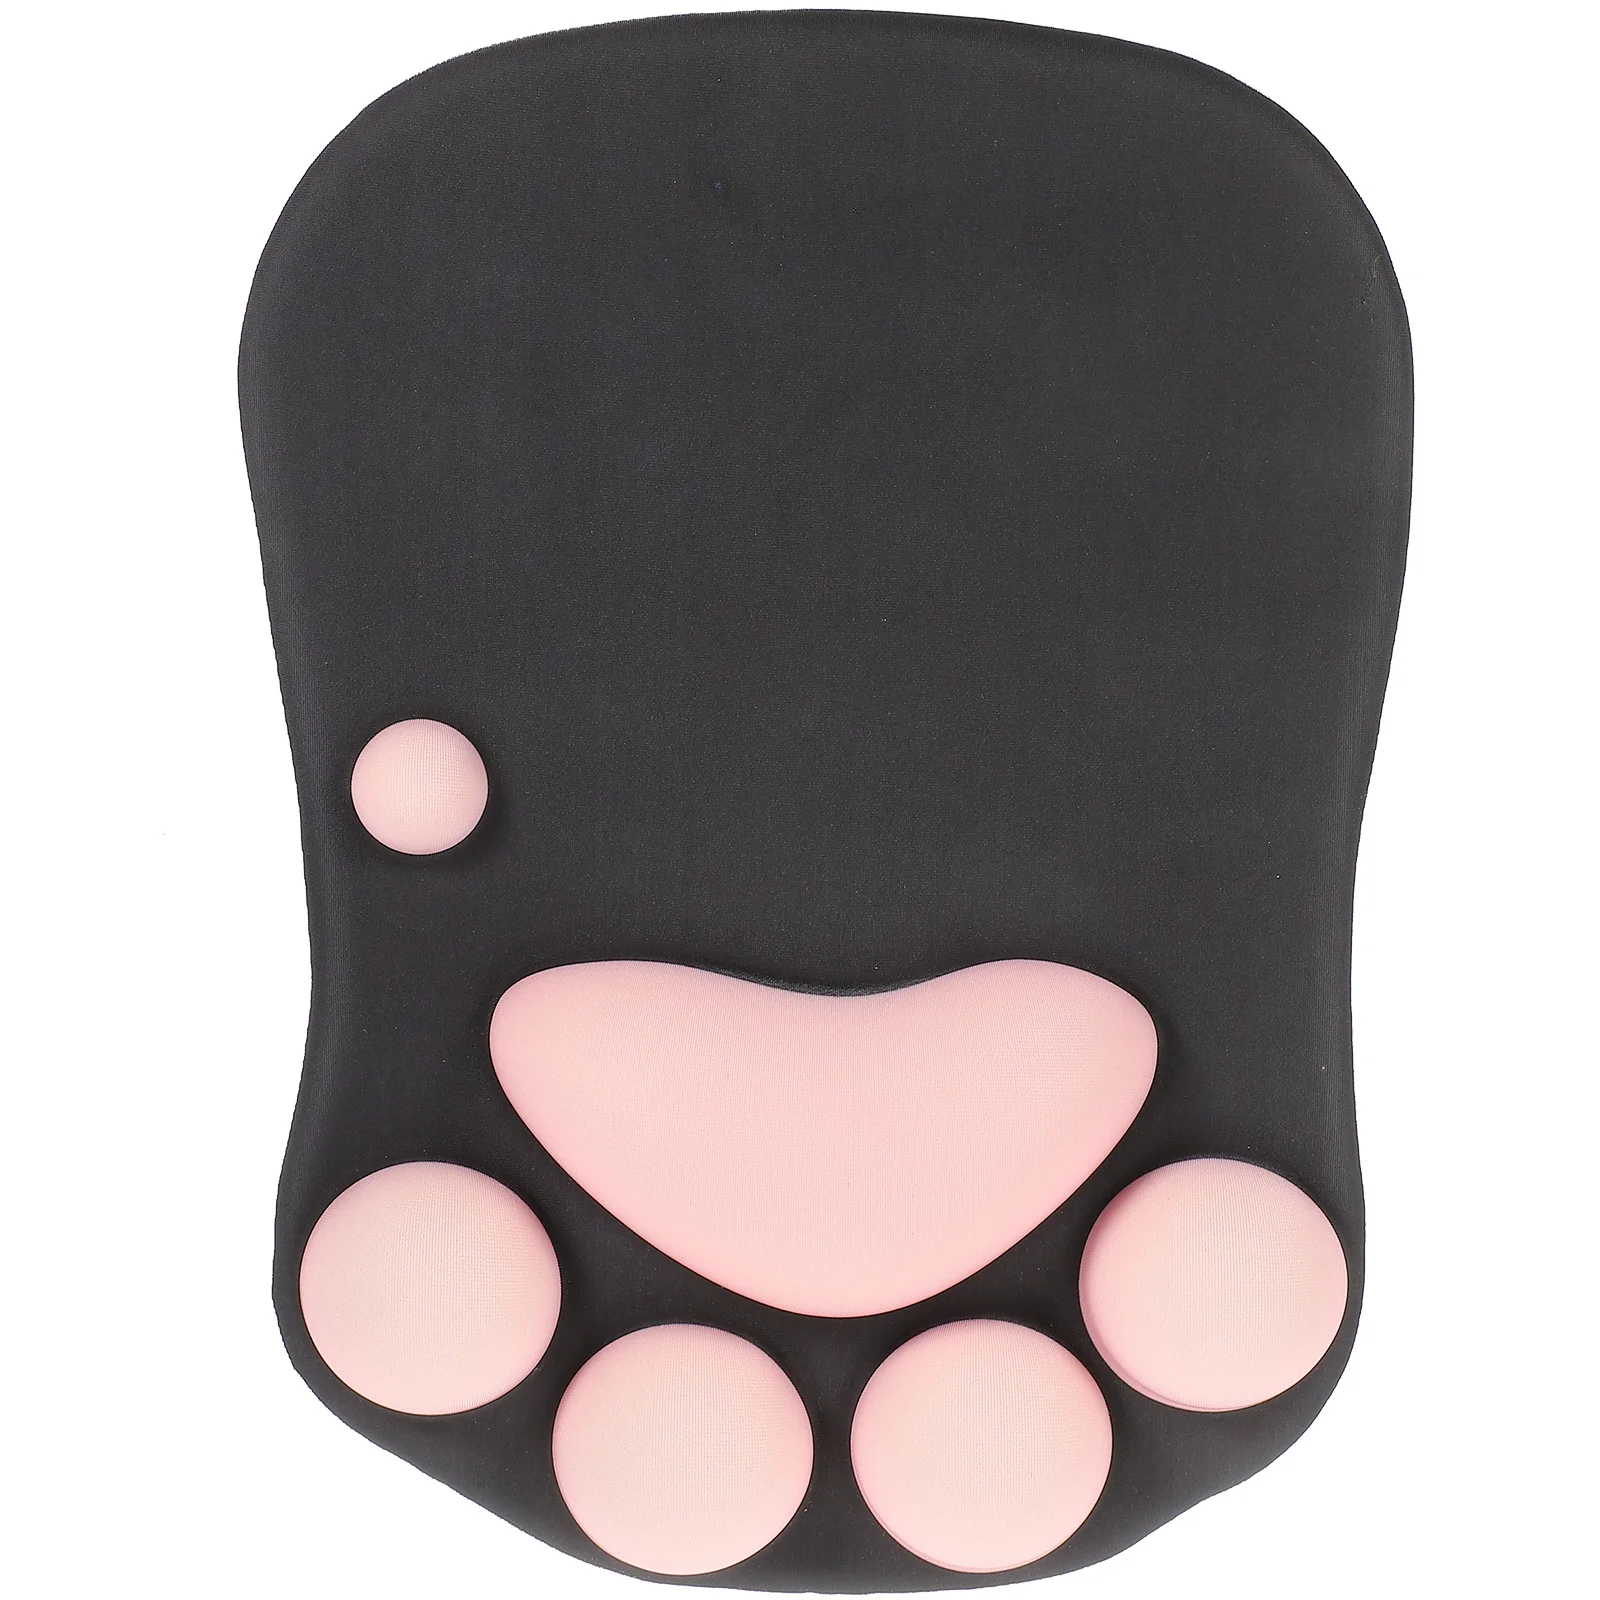 

Wrist Rest Mouse Pad Cat Paw Desk Gaming Mat Guard Support Home Silicone Silica Gel Cute Office